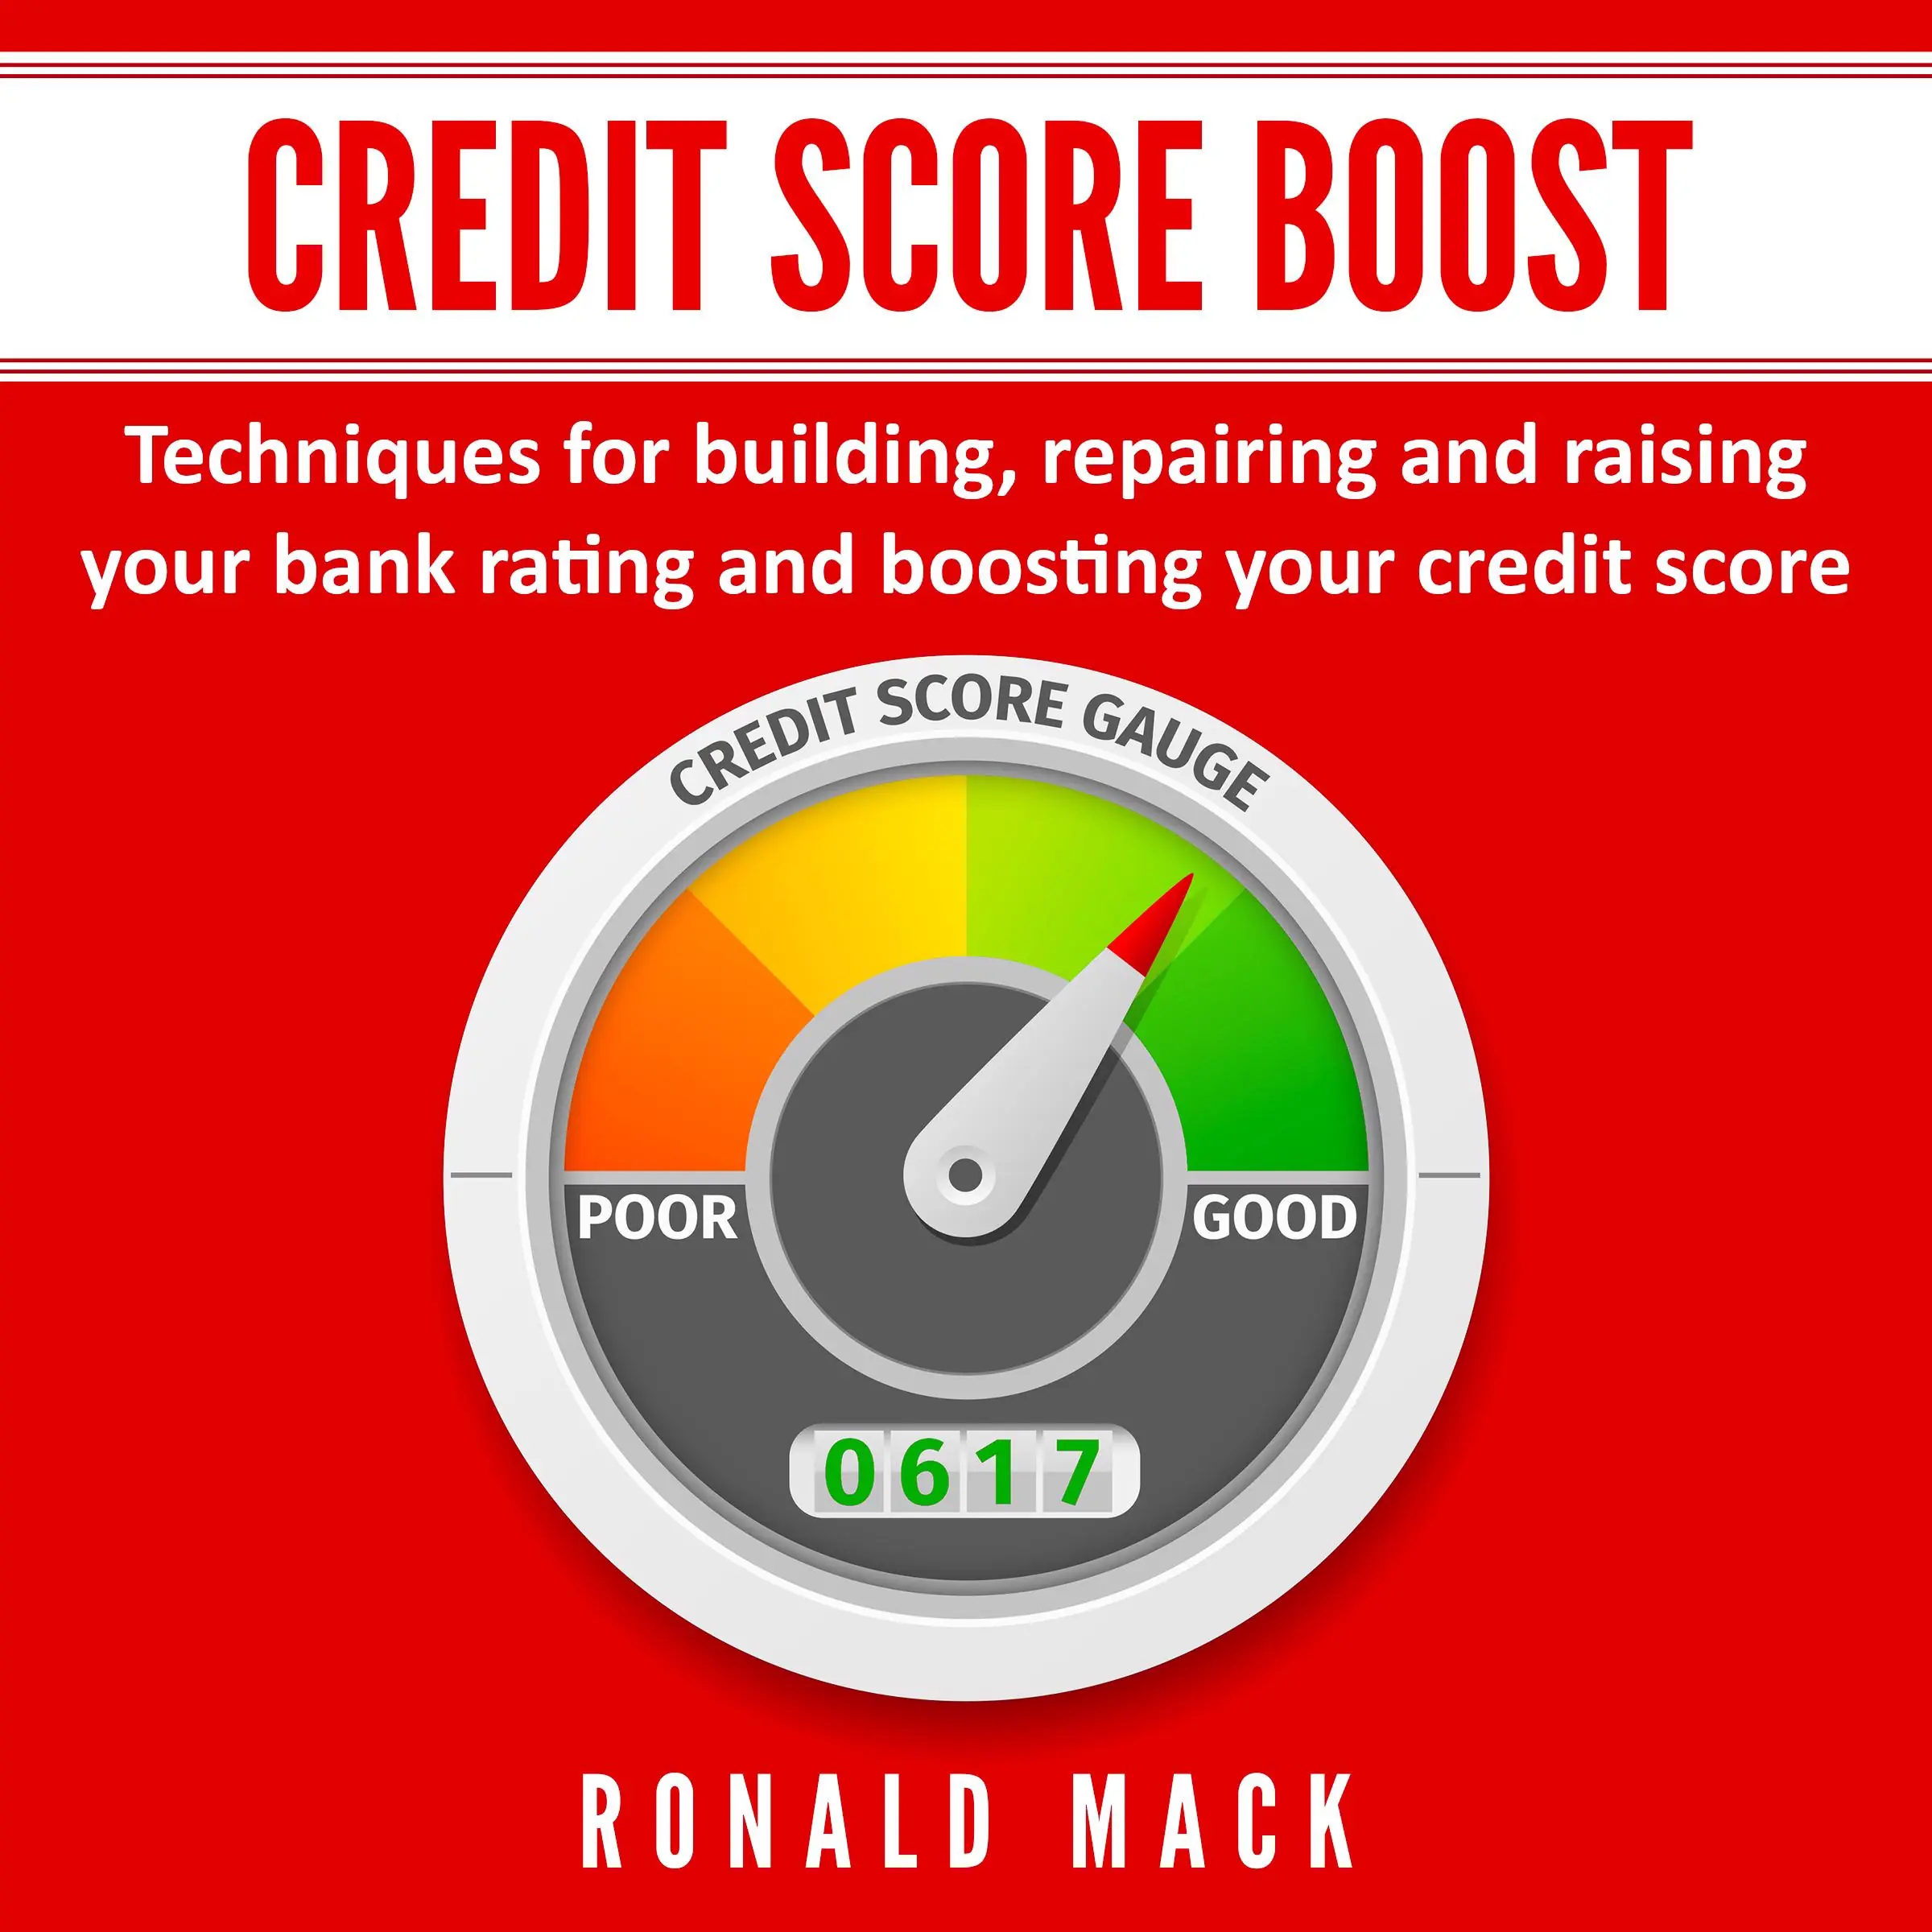 Credit Score Boost: Techniques for building, repairing and raising your bank rating and boosting your credit score. by Ronald Mack Audiobook